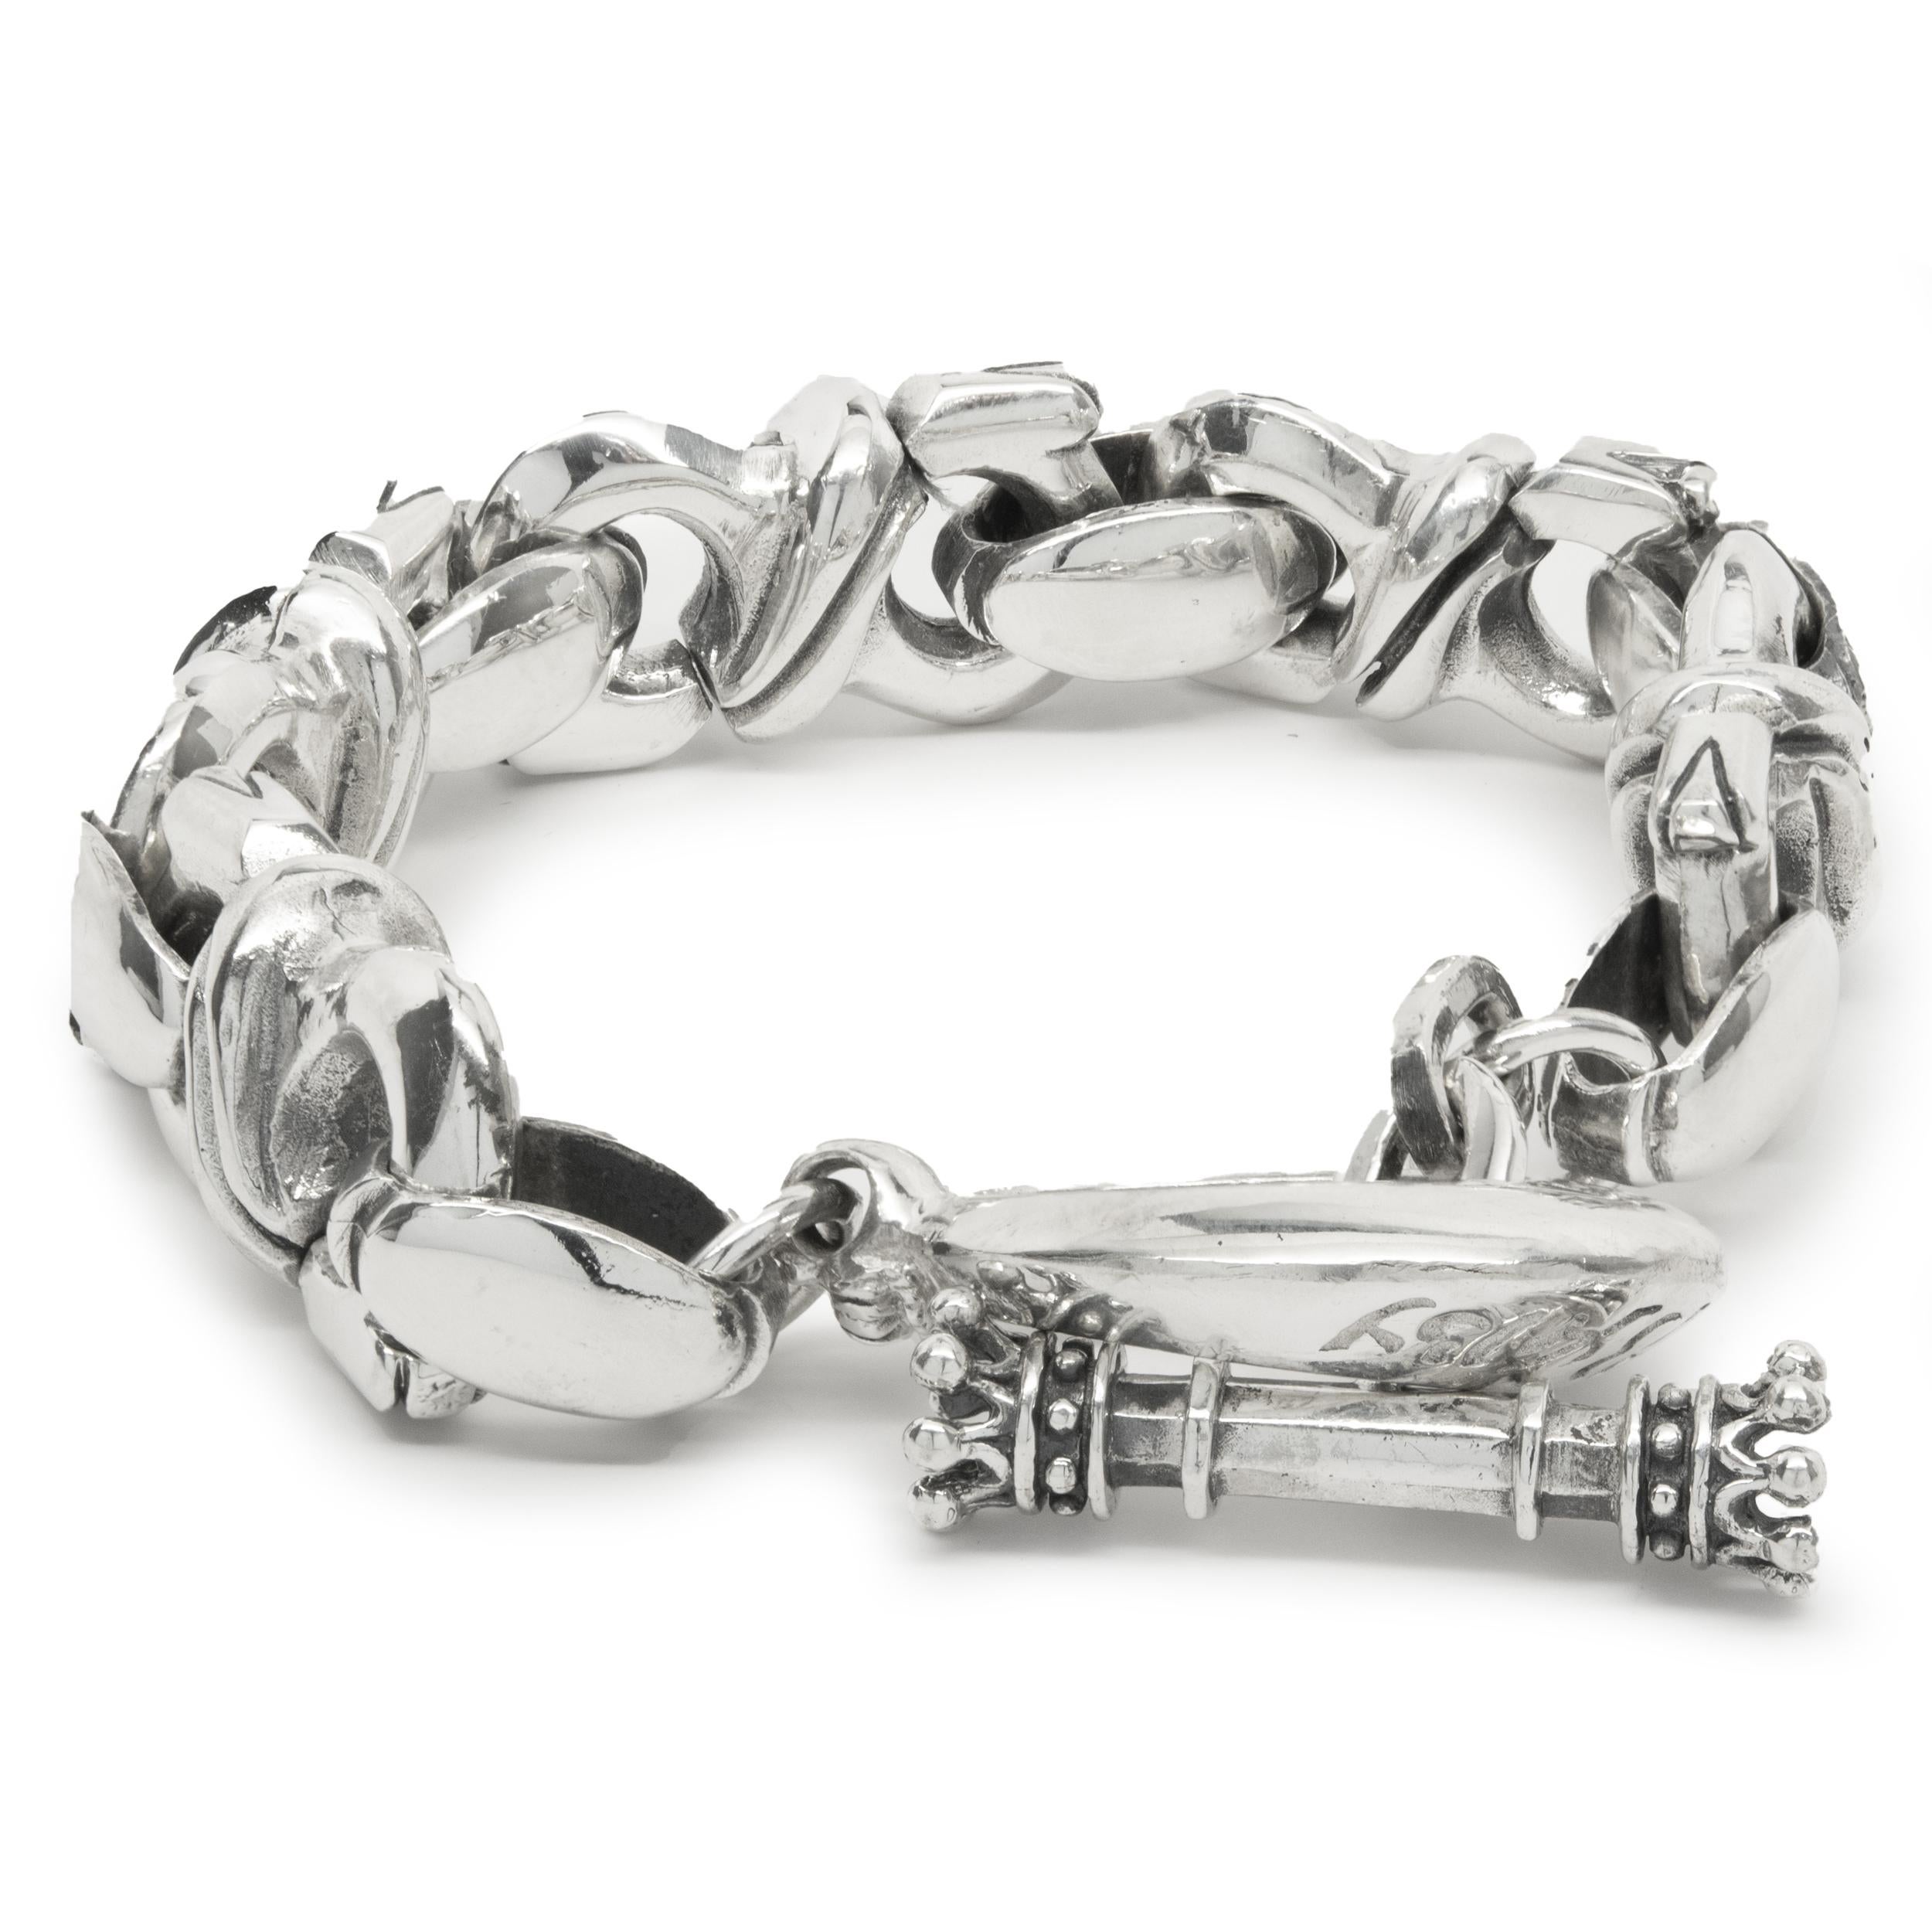 Designer:King Baby  
Material: sterling silver
Weight: 154.46 grams
Dimensions: bracelet measures 9-inches long
